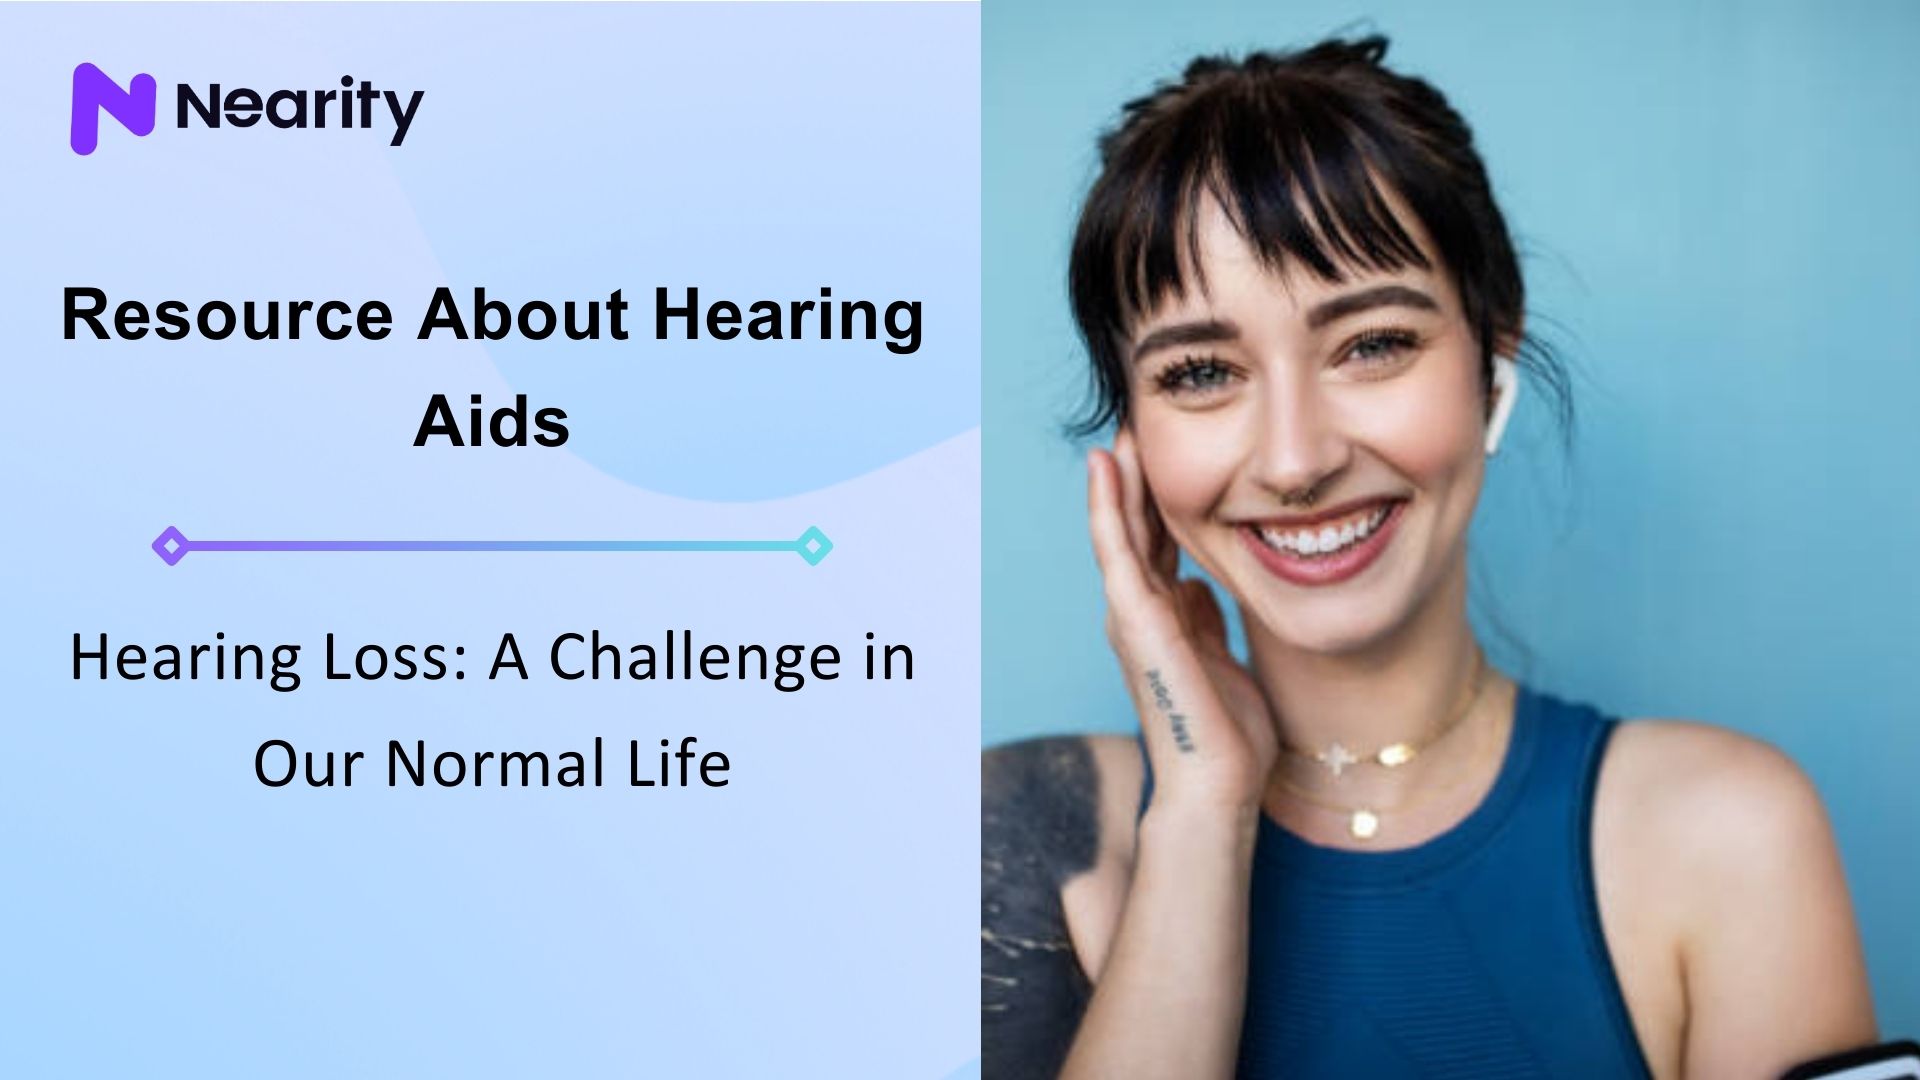 Hearing Loss: A Challenge in Our Normal Life